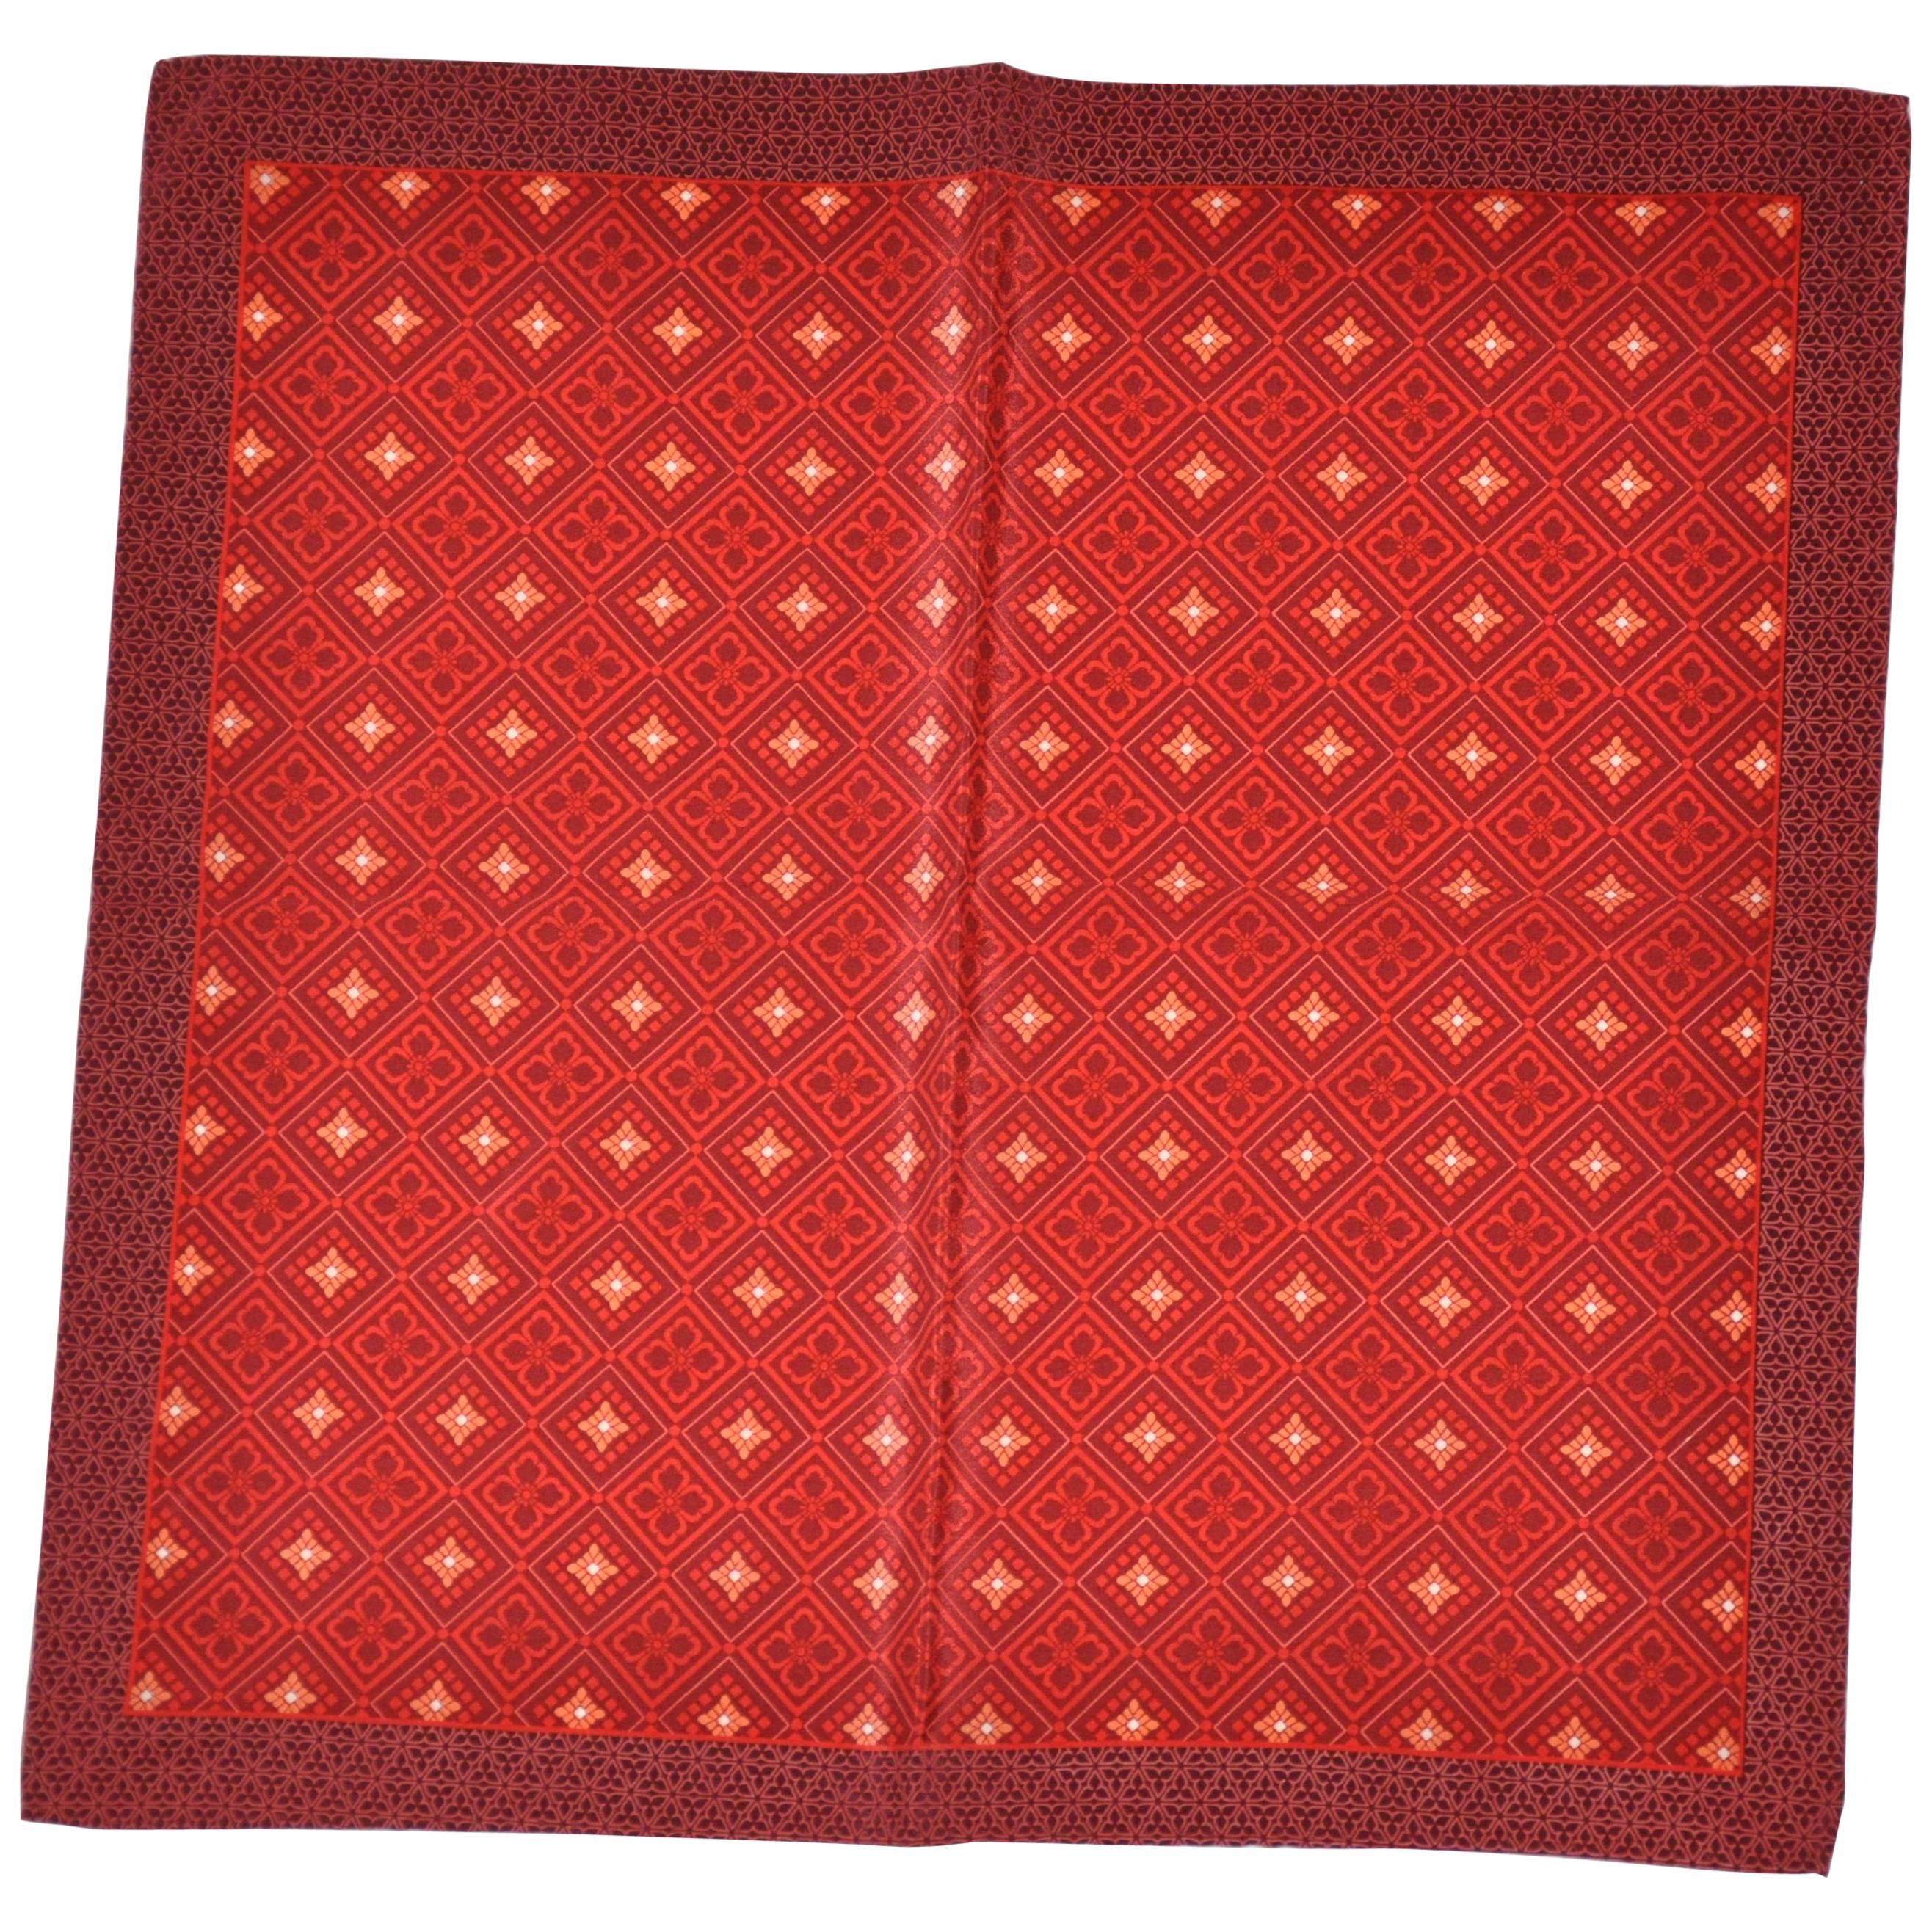 Burgundy with Multiple Reds Center Silk Handkerchief For Sale